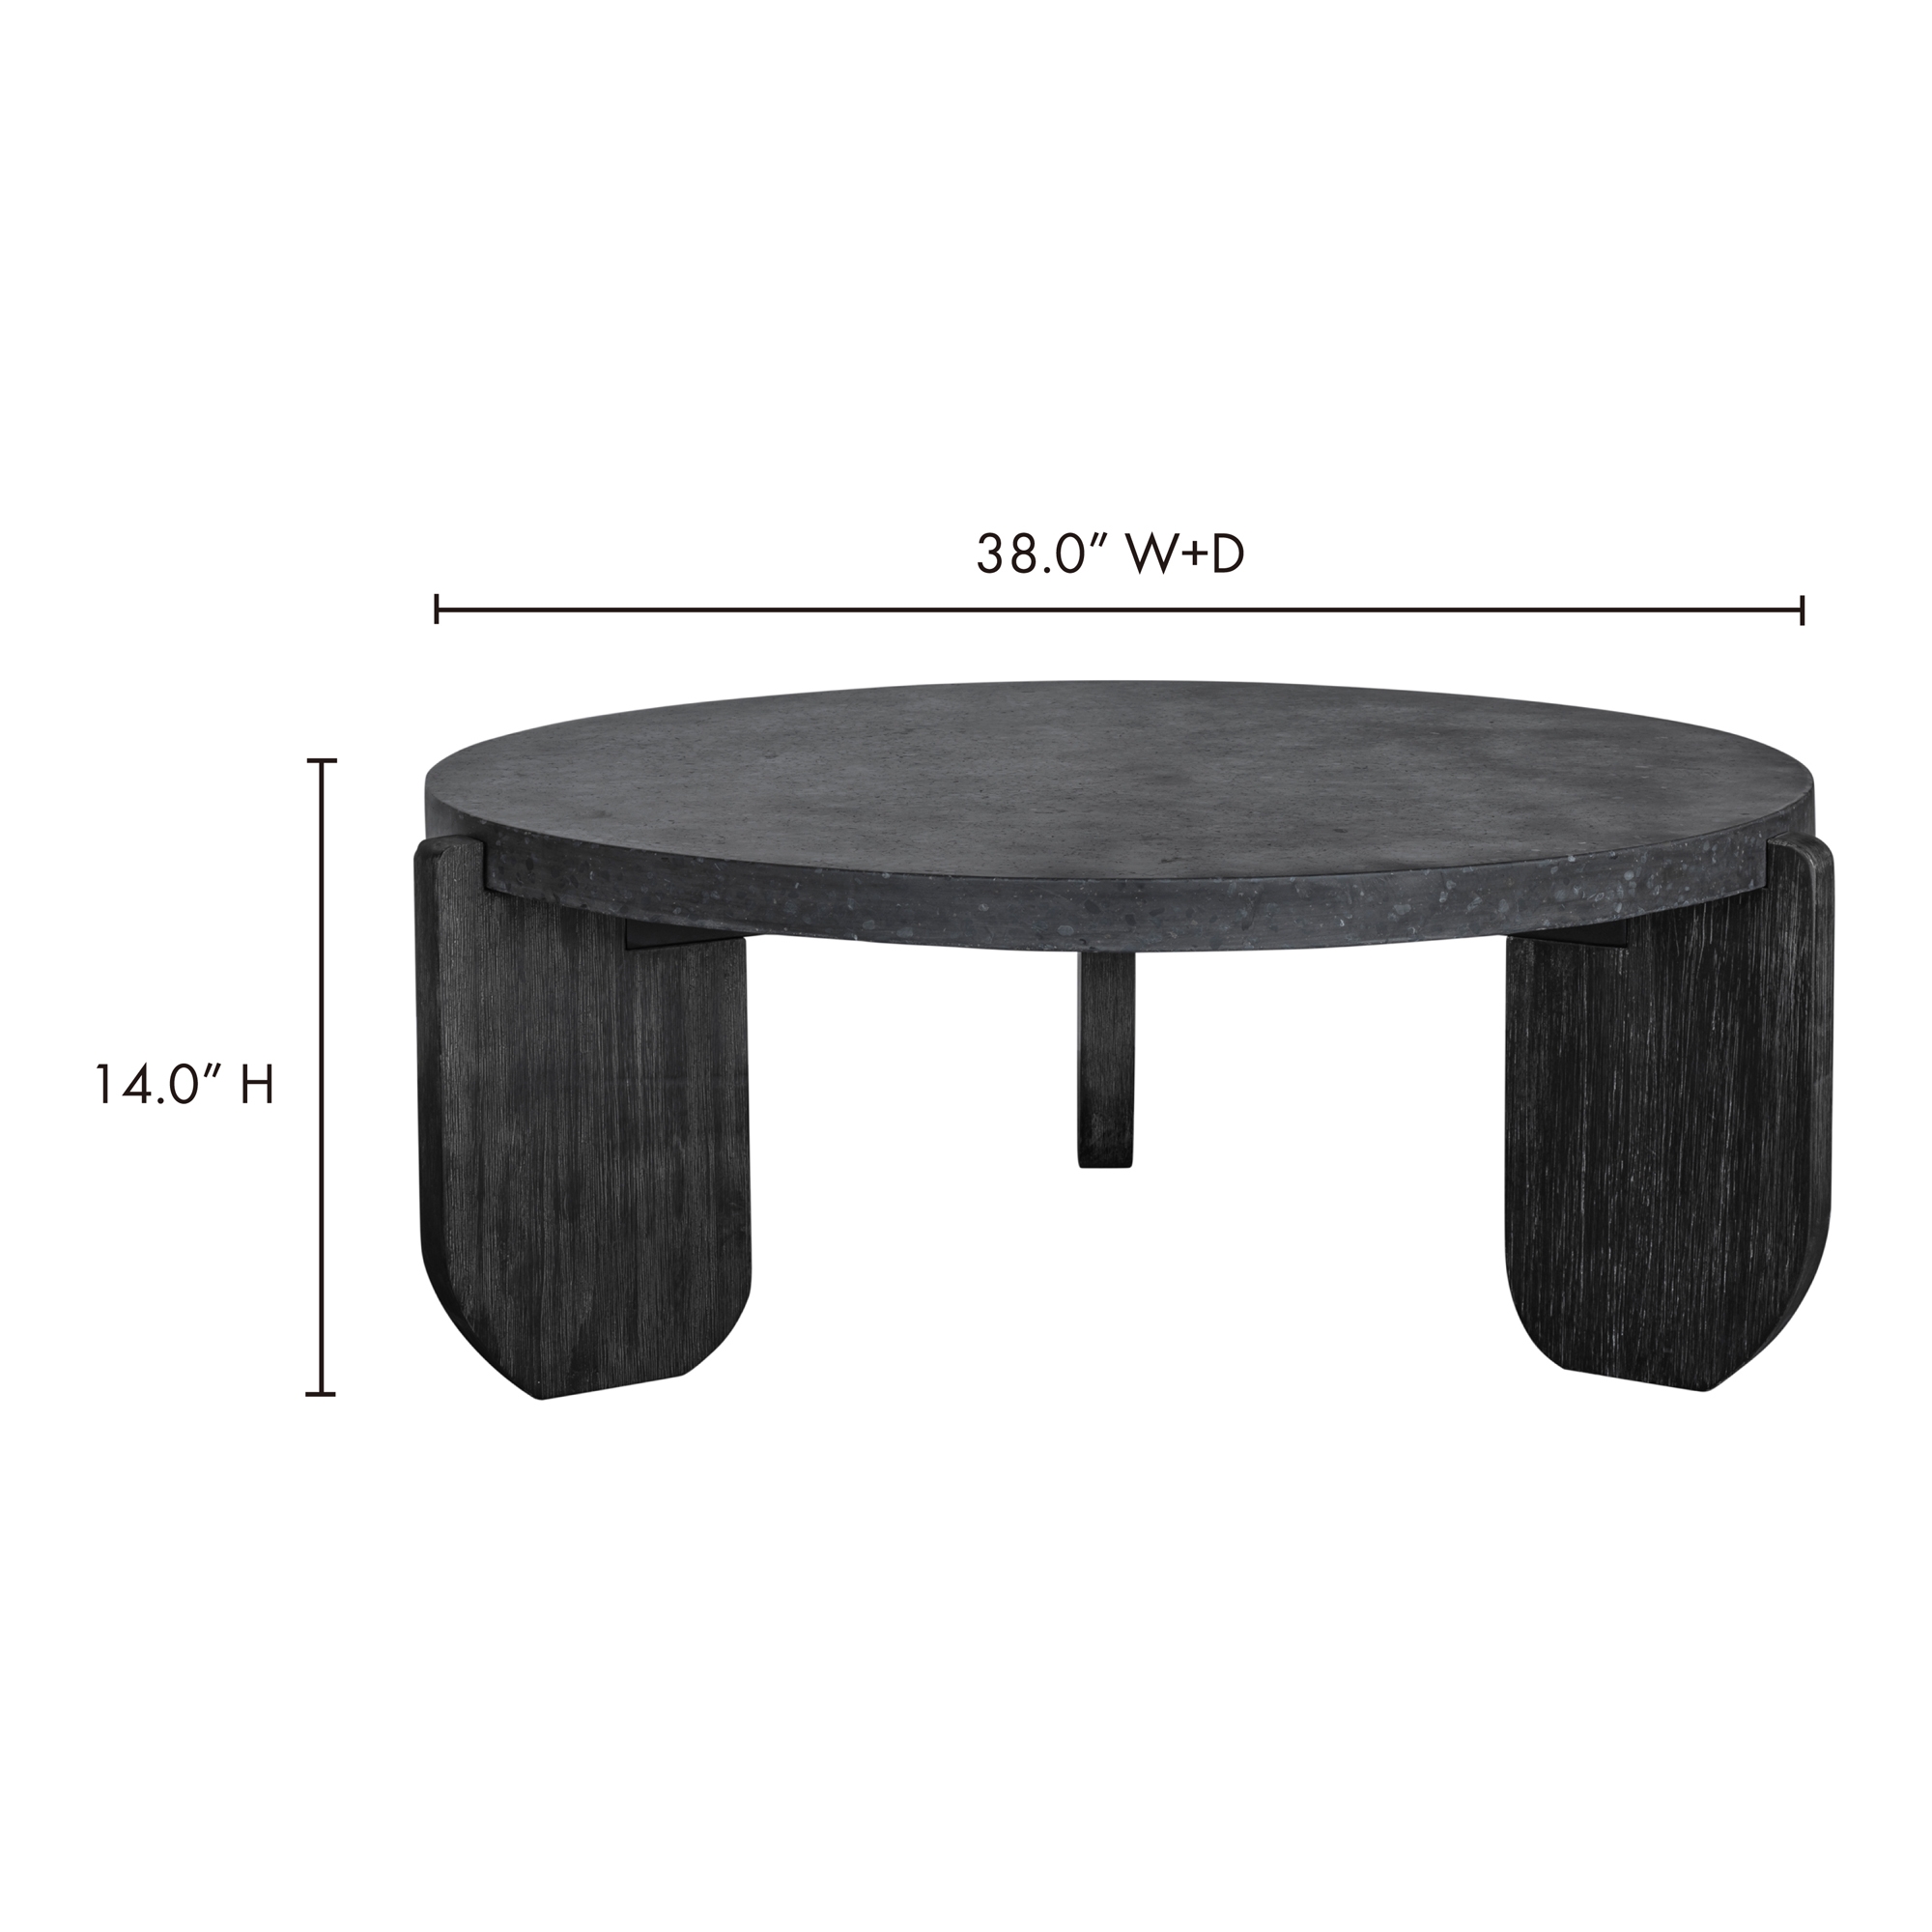 WUNDER COFFEE TABLE - Image 8